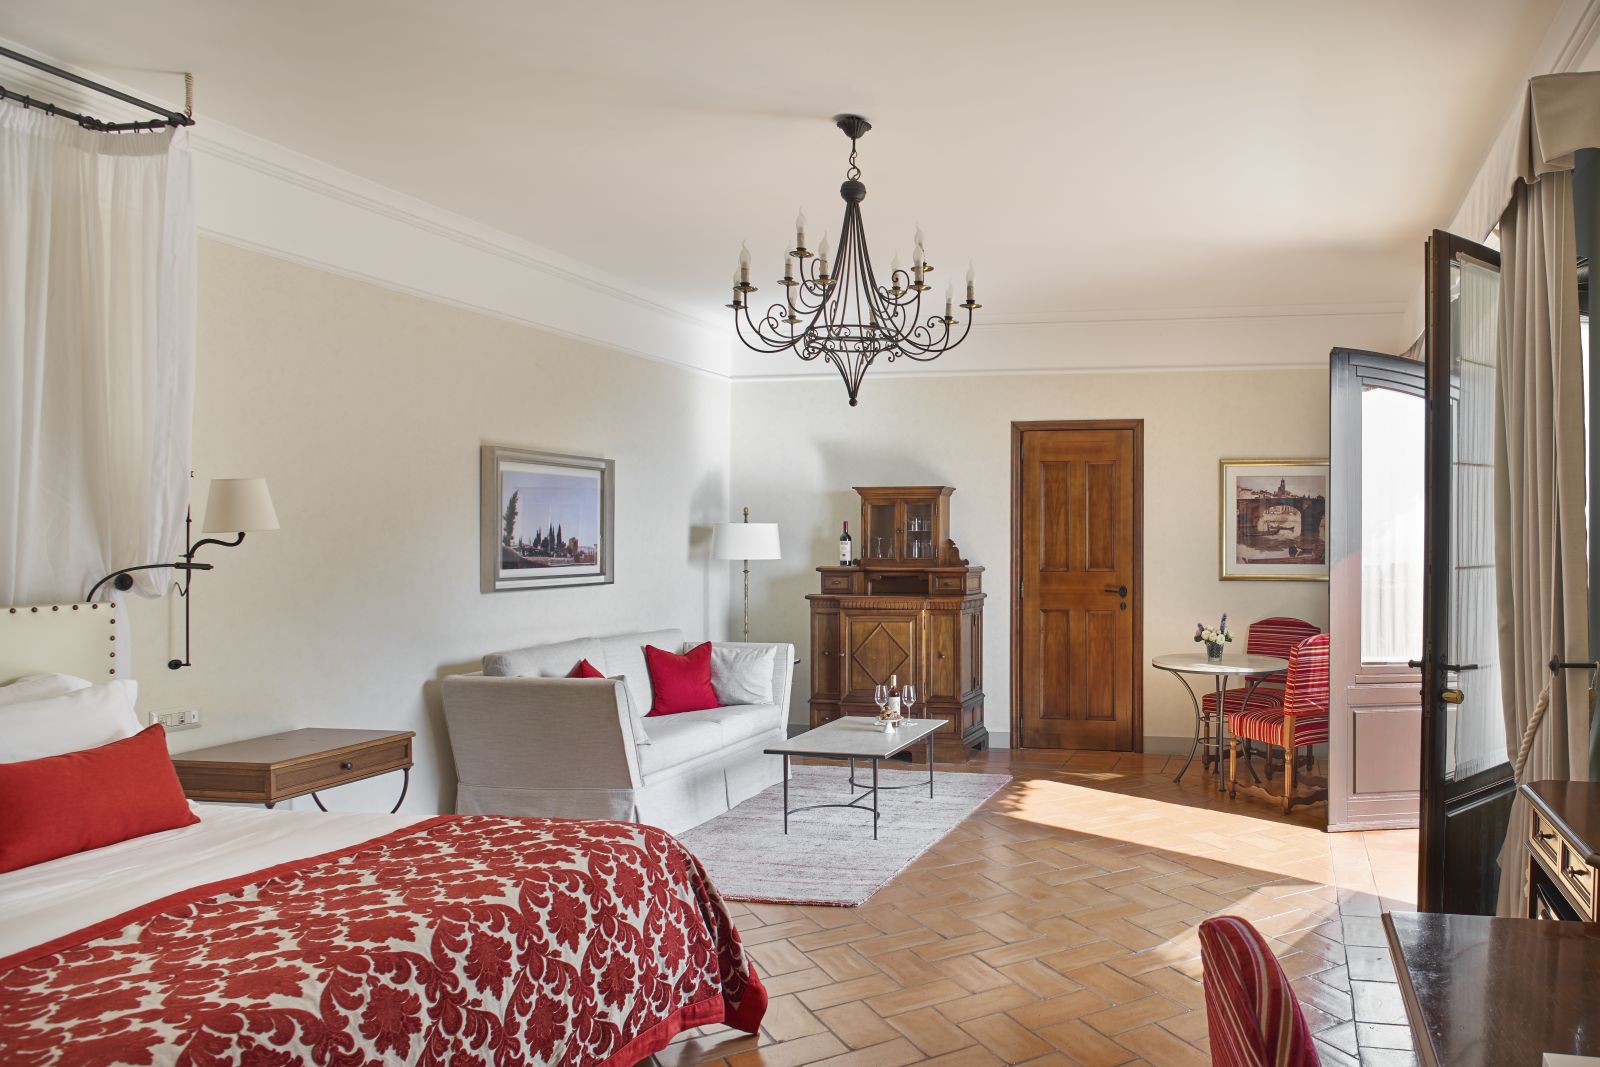 Suite at the Belmond Villa San Michele in Florence